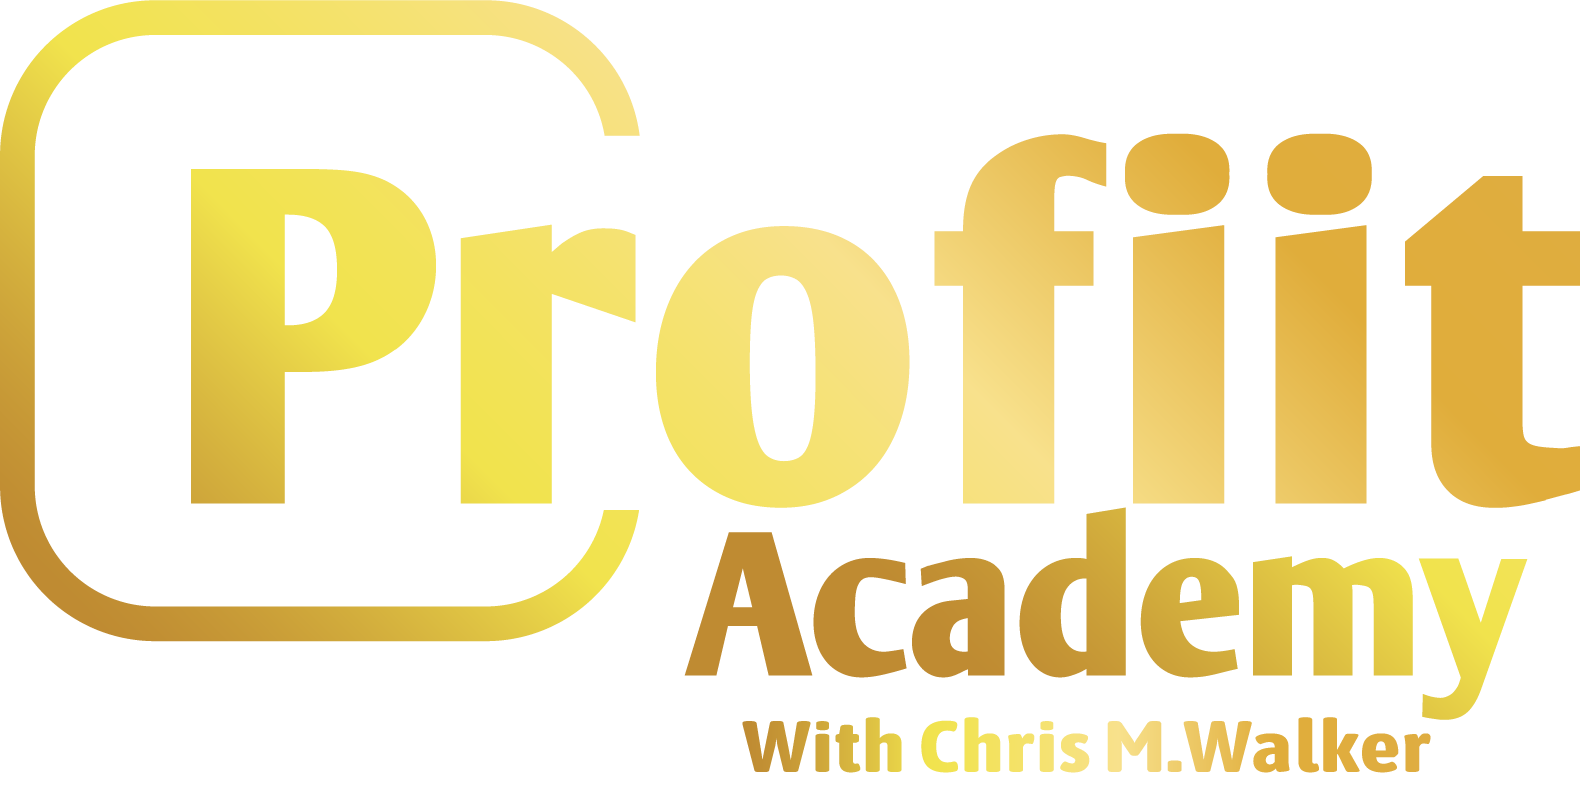 Are you finger lickin' good? - The Profiit Academy With Chris M. Walker